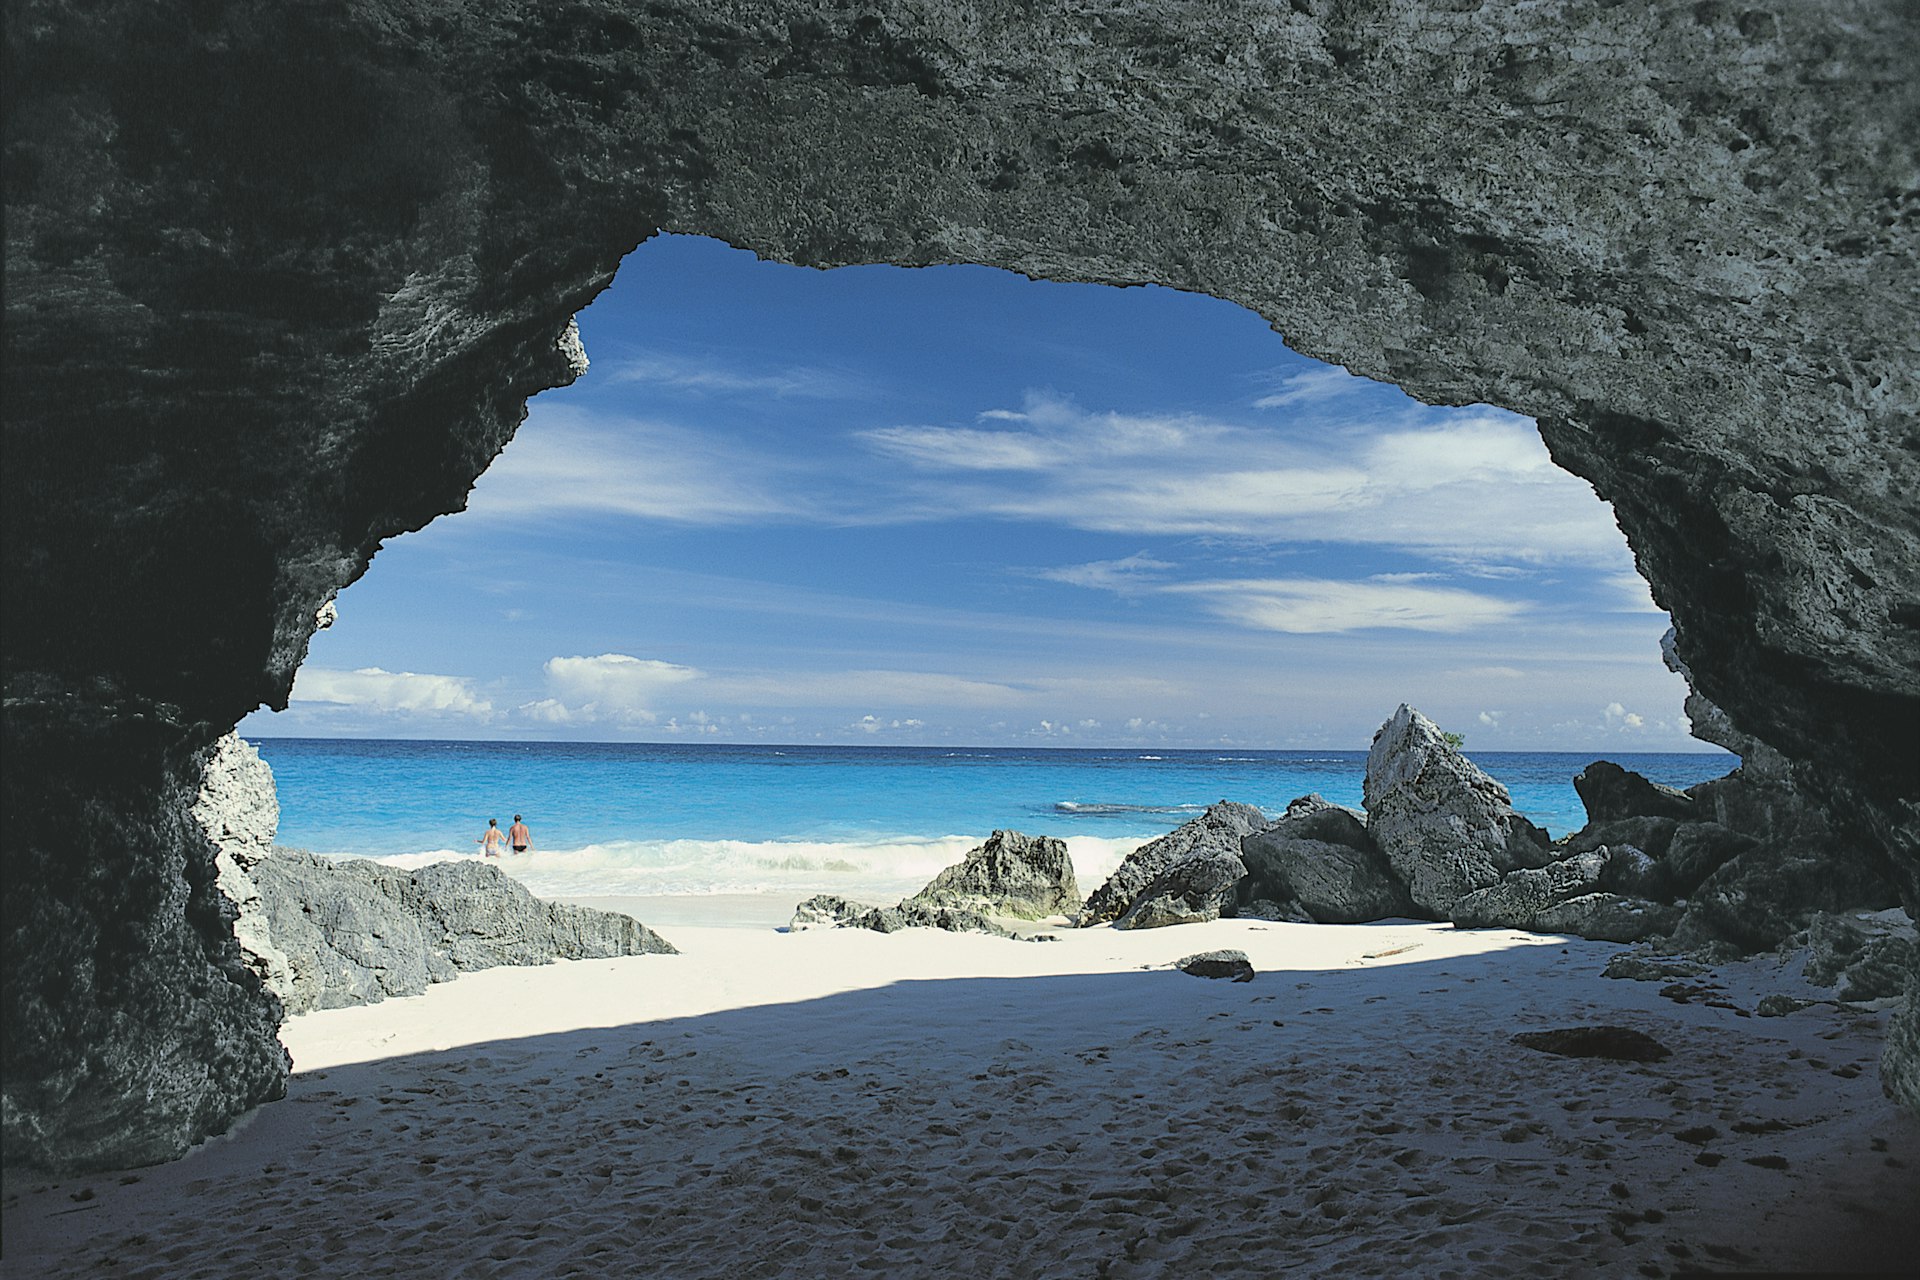 Rock formations on white sand beach in Bermuda